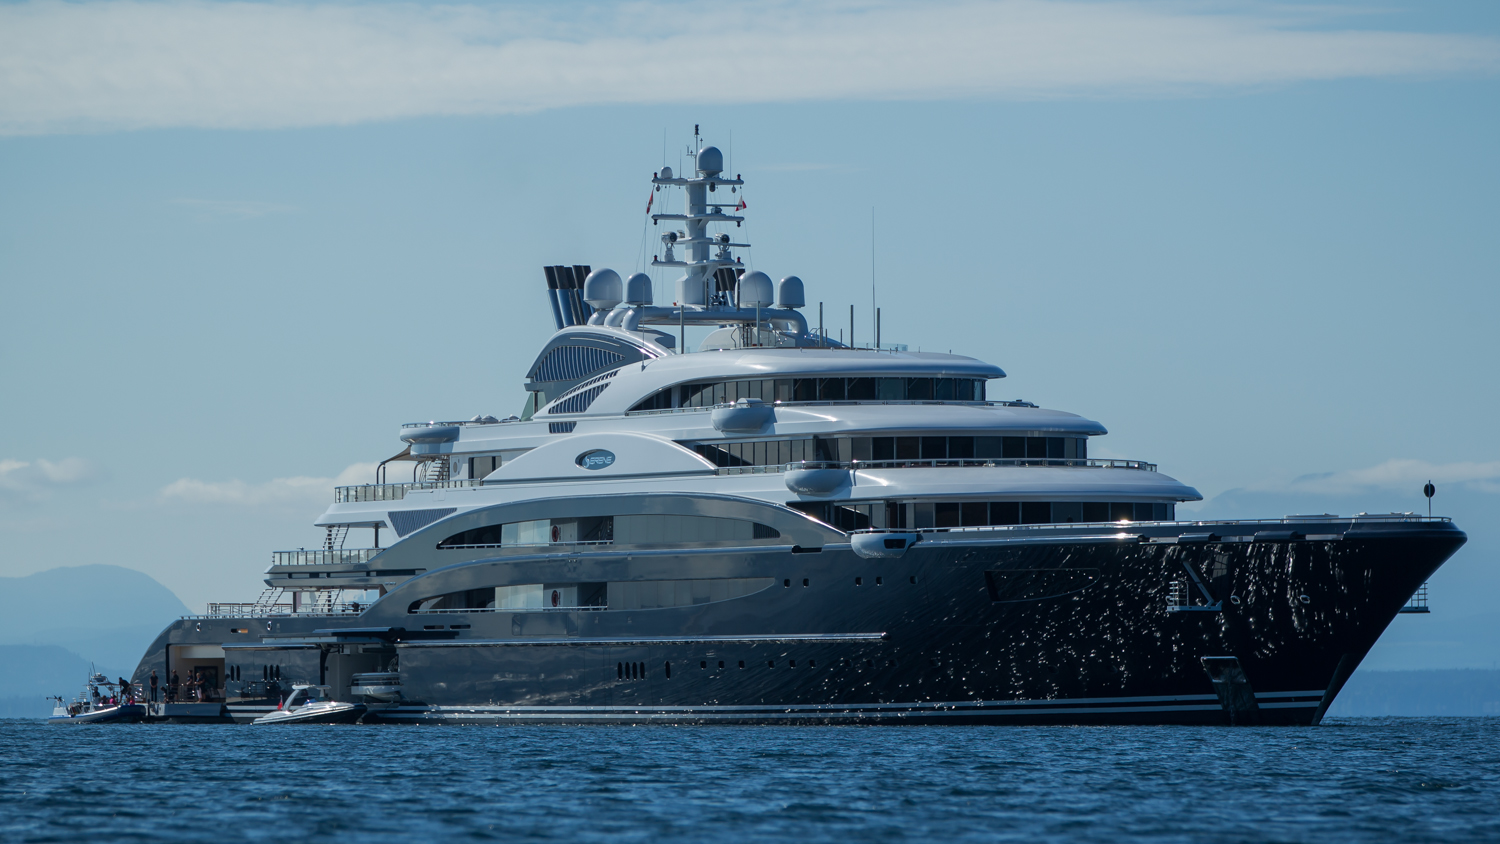 Luxury Super yacht SERENE - Photo by Victor Davare - Vancouver Island Photography